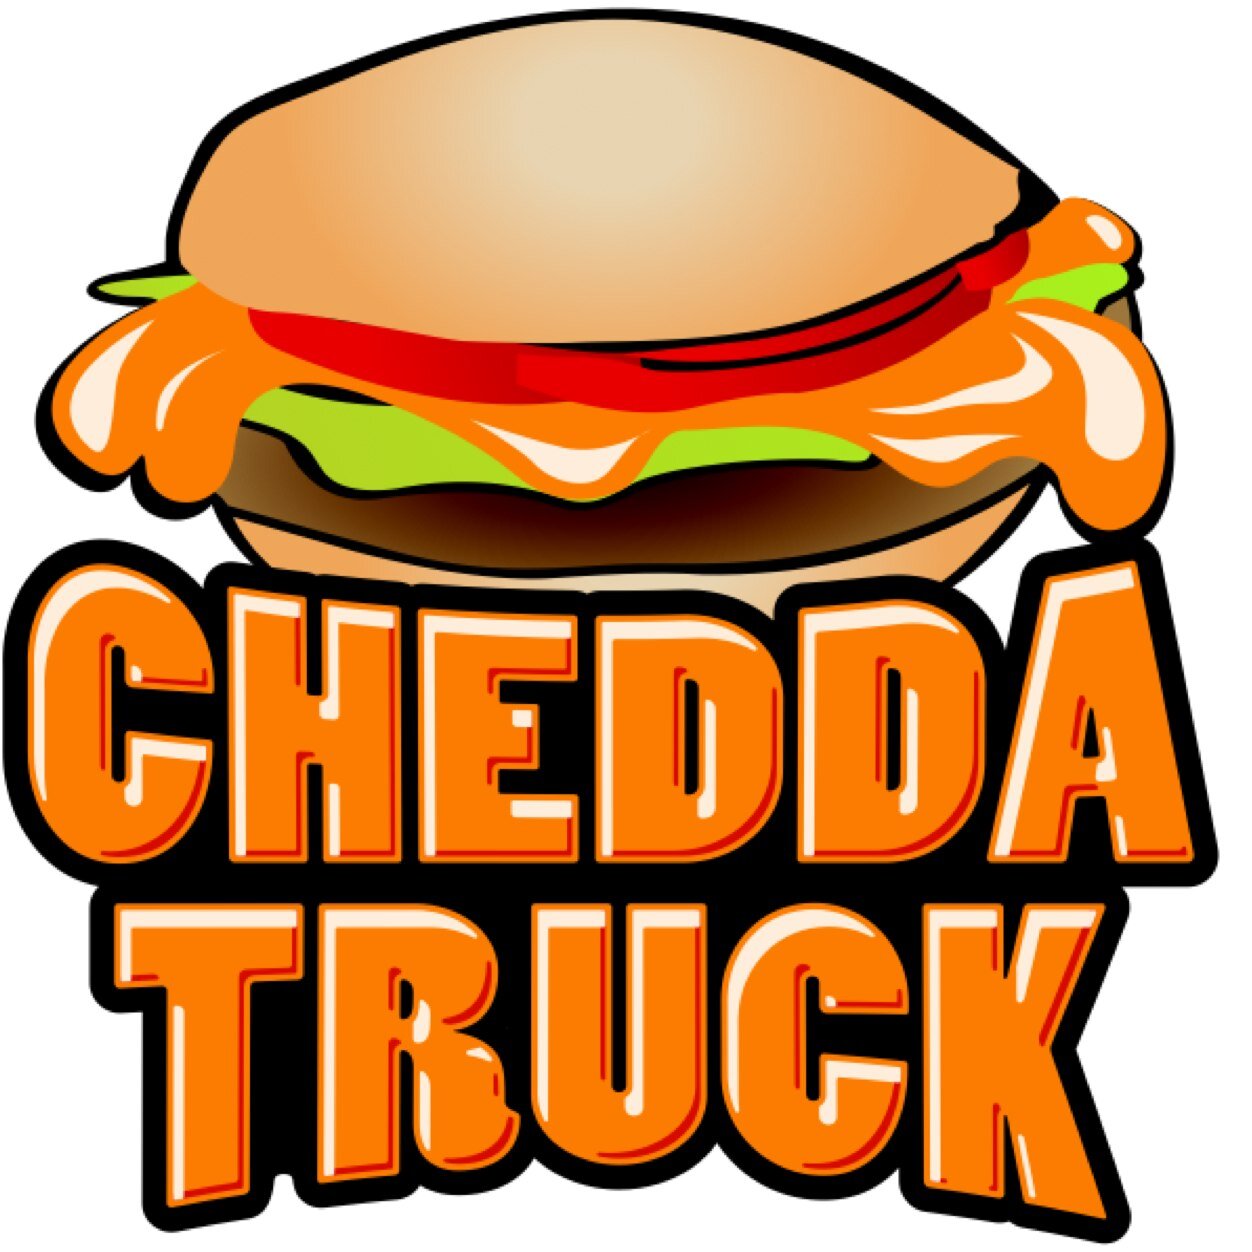 Cheddatruckut Profile Picture